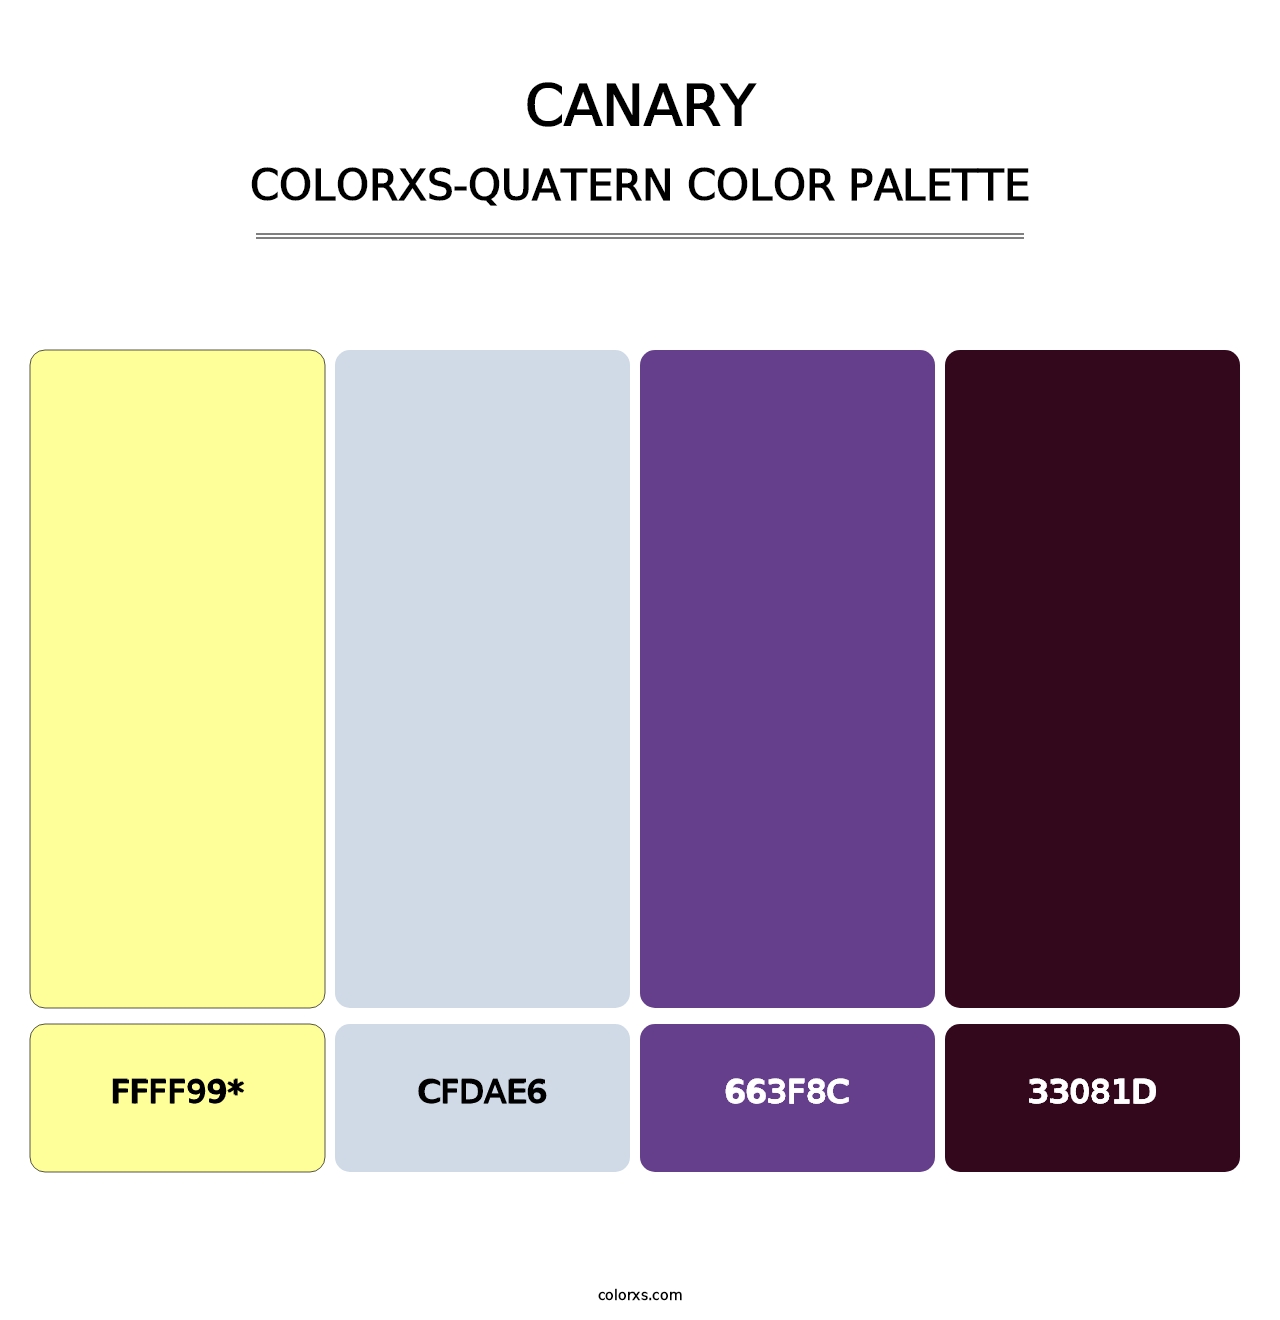 Canary - Colorxs Quatern Palette